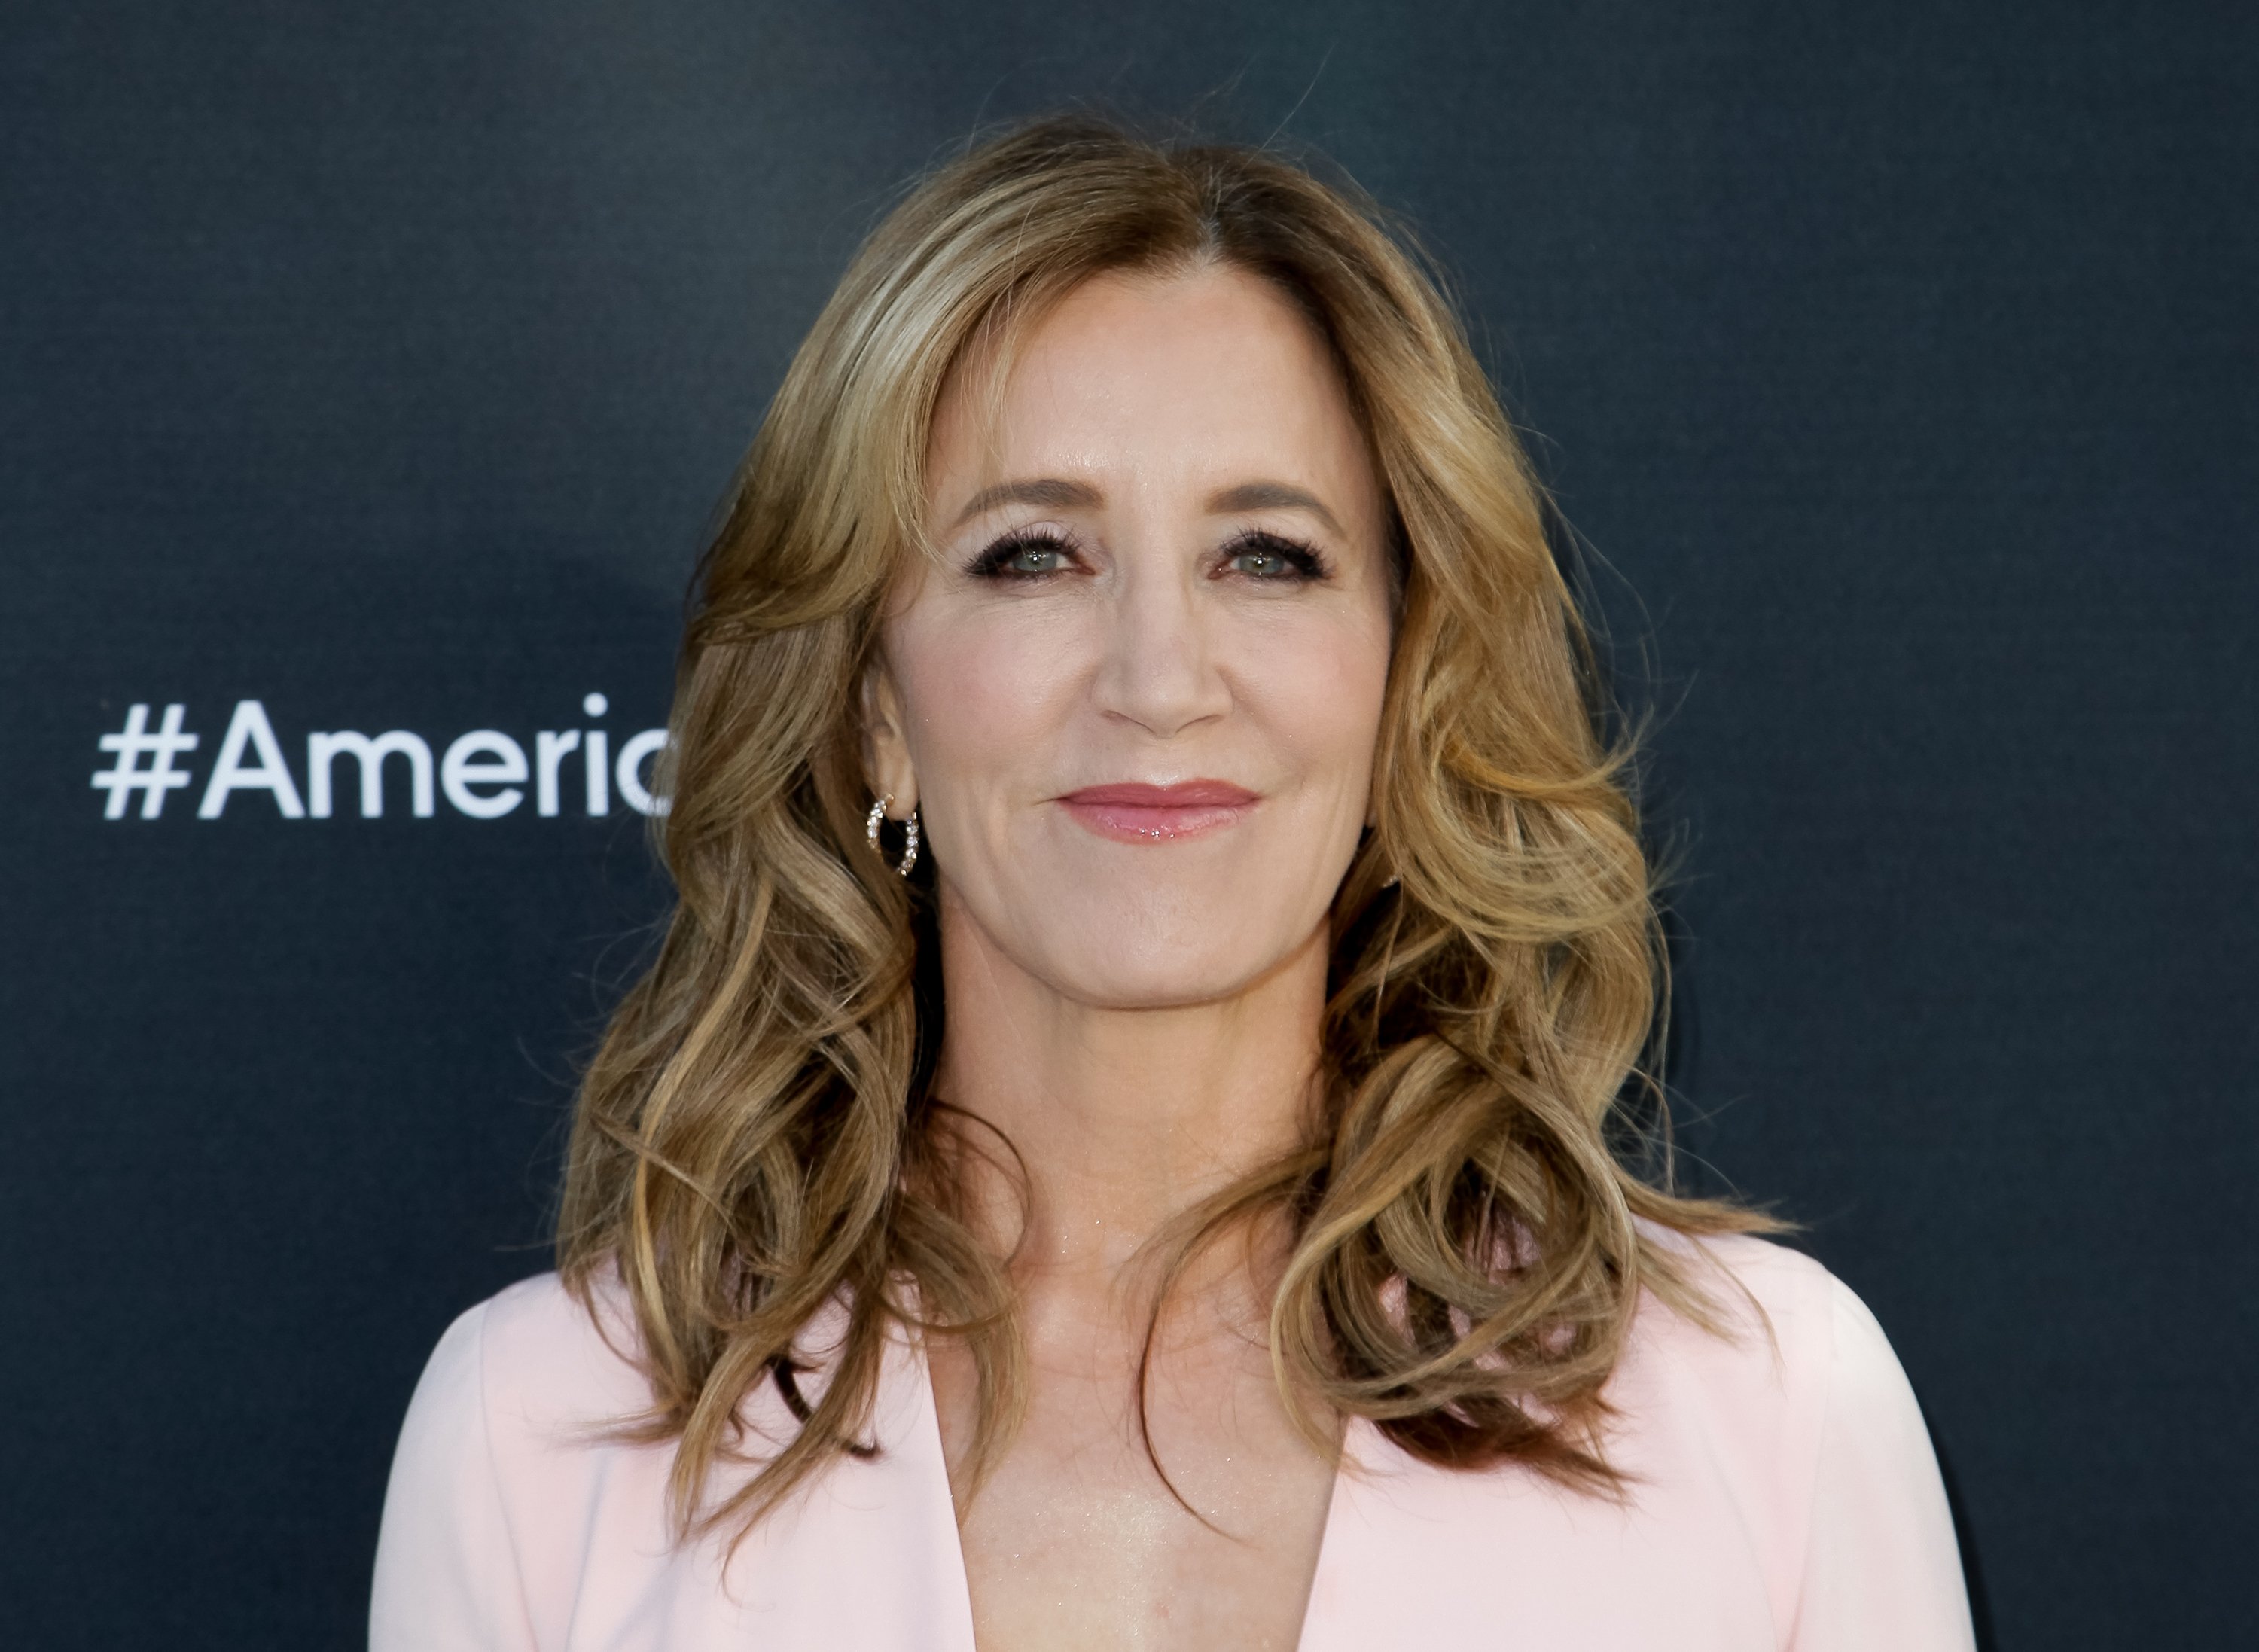 Felicity Huffman attends the FYC event for ABC's 'American Crime' at Saban Media Center on April 29, 2017, in North Hollywood, California. | Source: Getty Images.